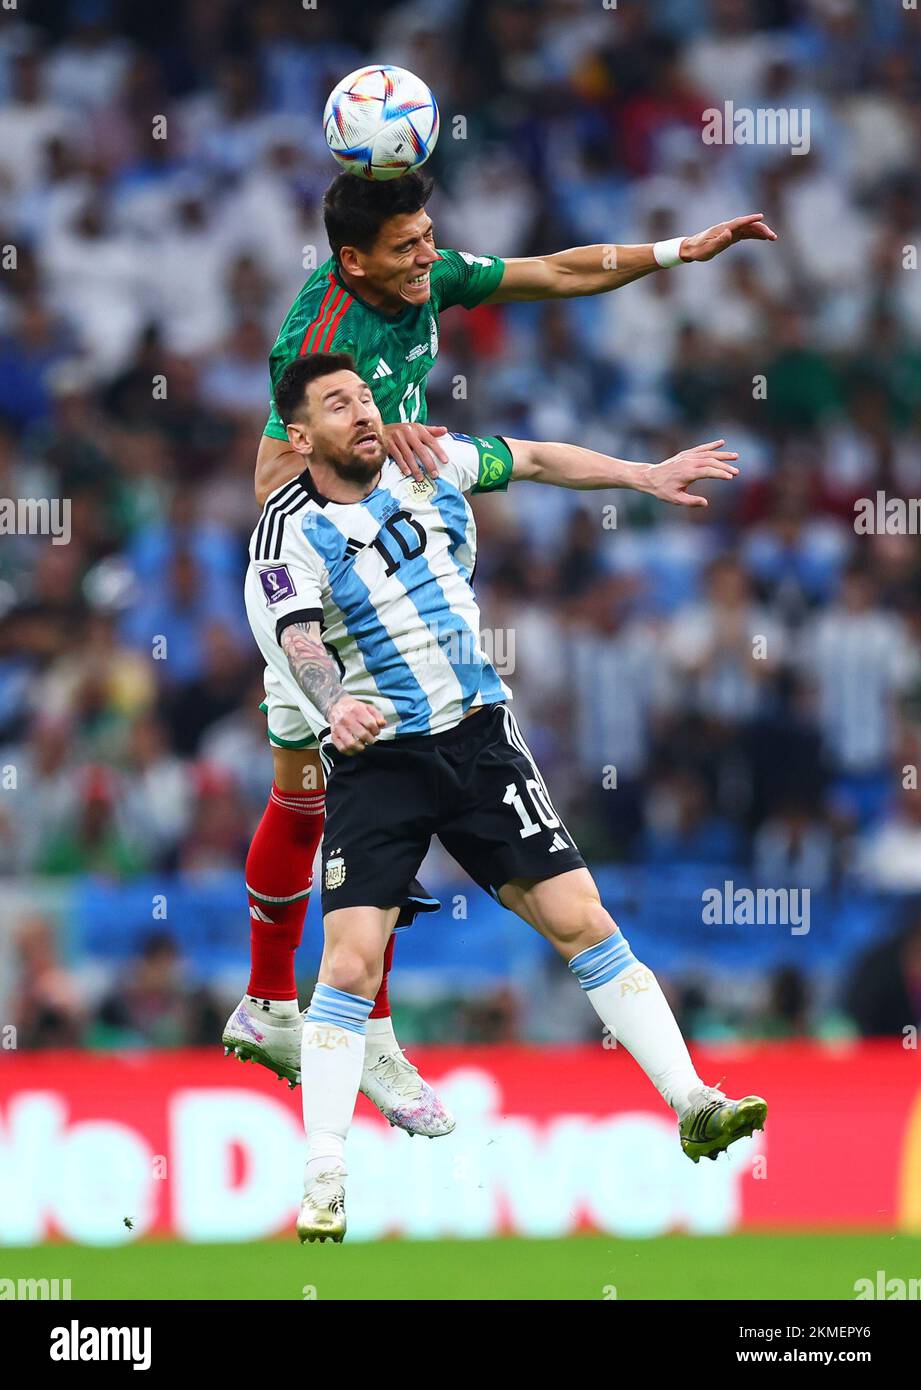 Lusail, Qatar. 26th Nov, 2022. Soccer, World Cup, Argentina - Mexico, Preliminary round, Group C, Matchday 2, Lusail Iconic Stadium, Lionel Messi (l) of Argentina against Hector Moreno (r) of Mexico in a header duel. Credit: Tom Weller/dpa/Alamy Live News Stock Photo